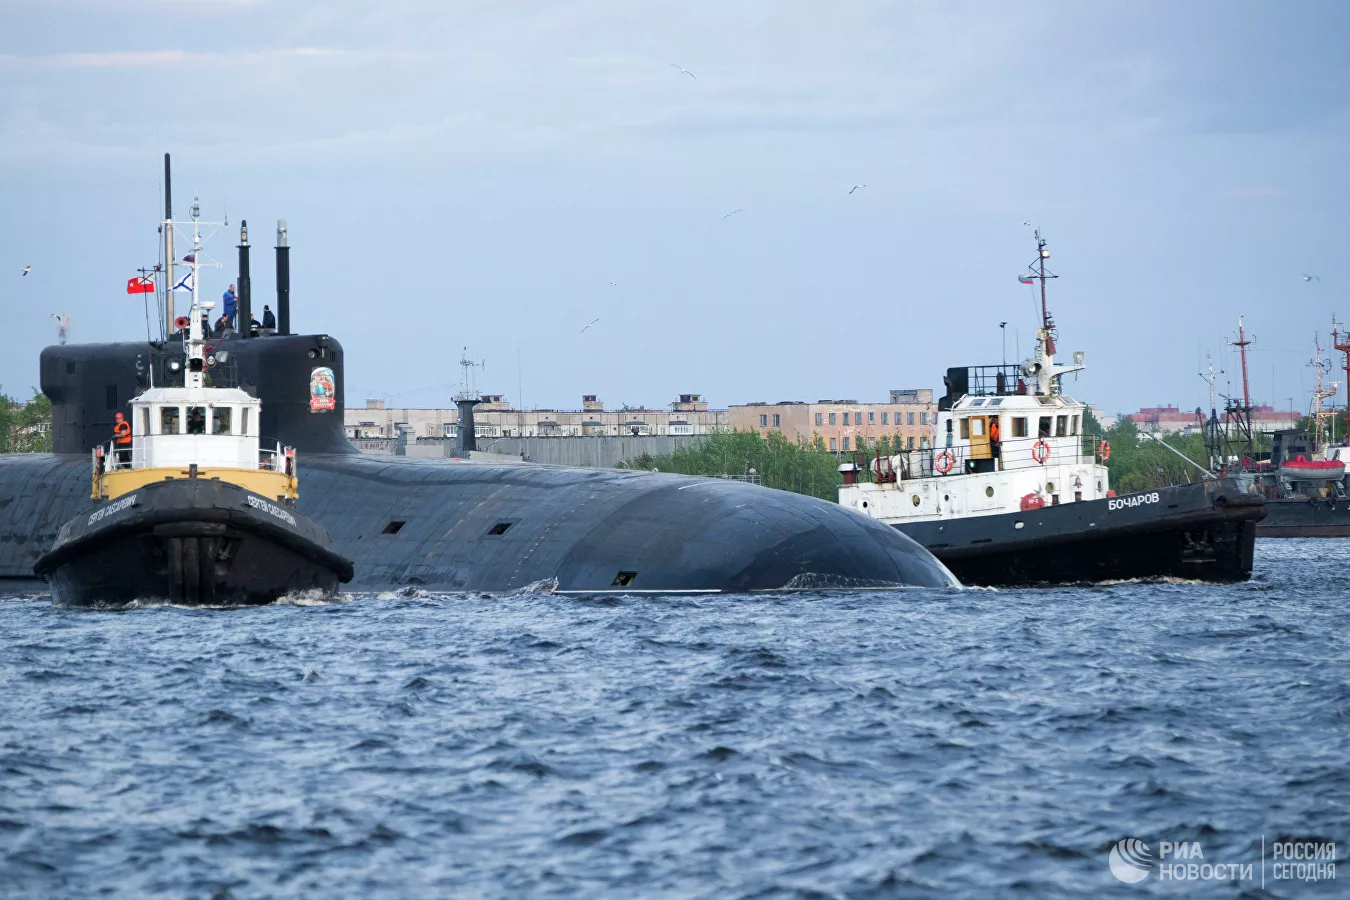 Russia's Nuclear-Powered Missile Carrier Submarine Knyaz Vladimir Entered Combat Duty